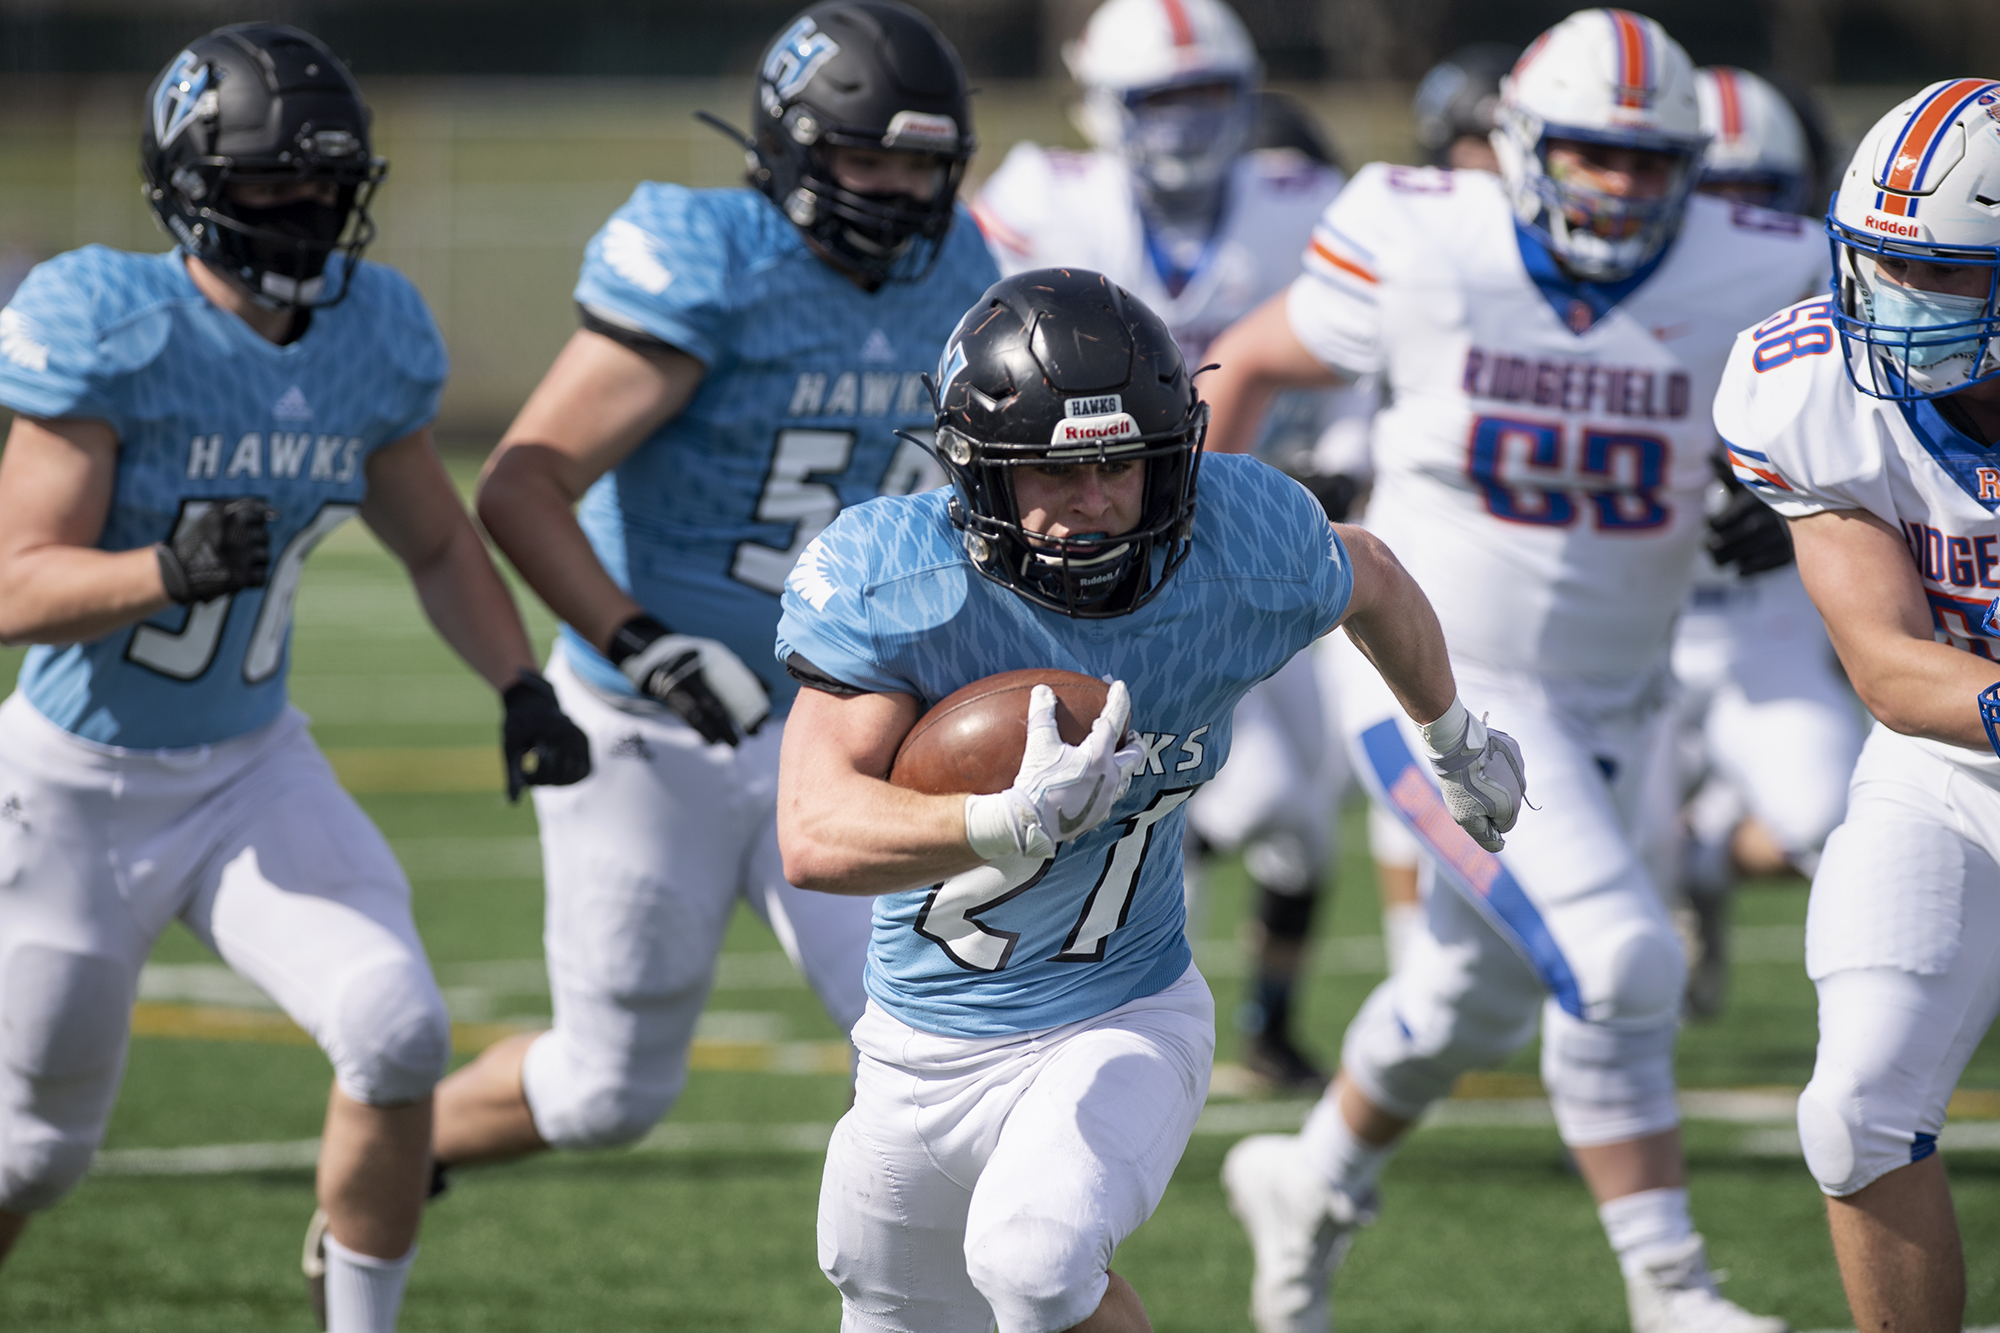 Hockinson’s Daniel Thompson scampers away from the rest of the pack as he rumbles to a first-quarter touchdown on Saturday, March 13, 2021, at District Stadium in Battle Ground. Hockinson won 14-7 in the game between the 2A Greater St. Helens League’s top two teams.